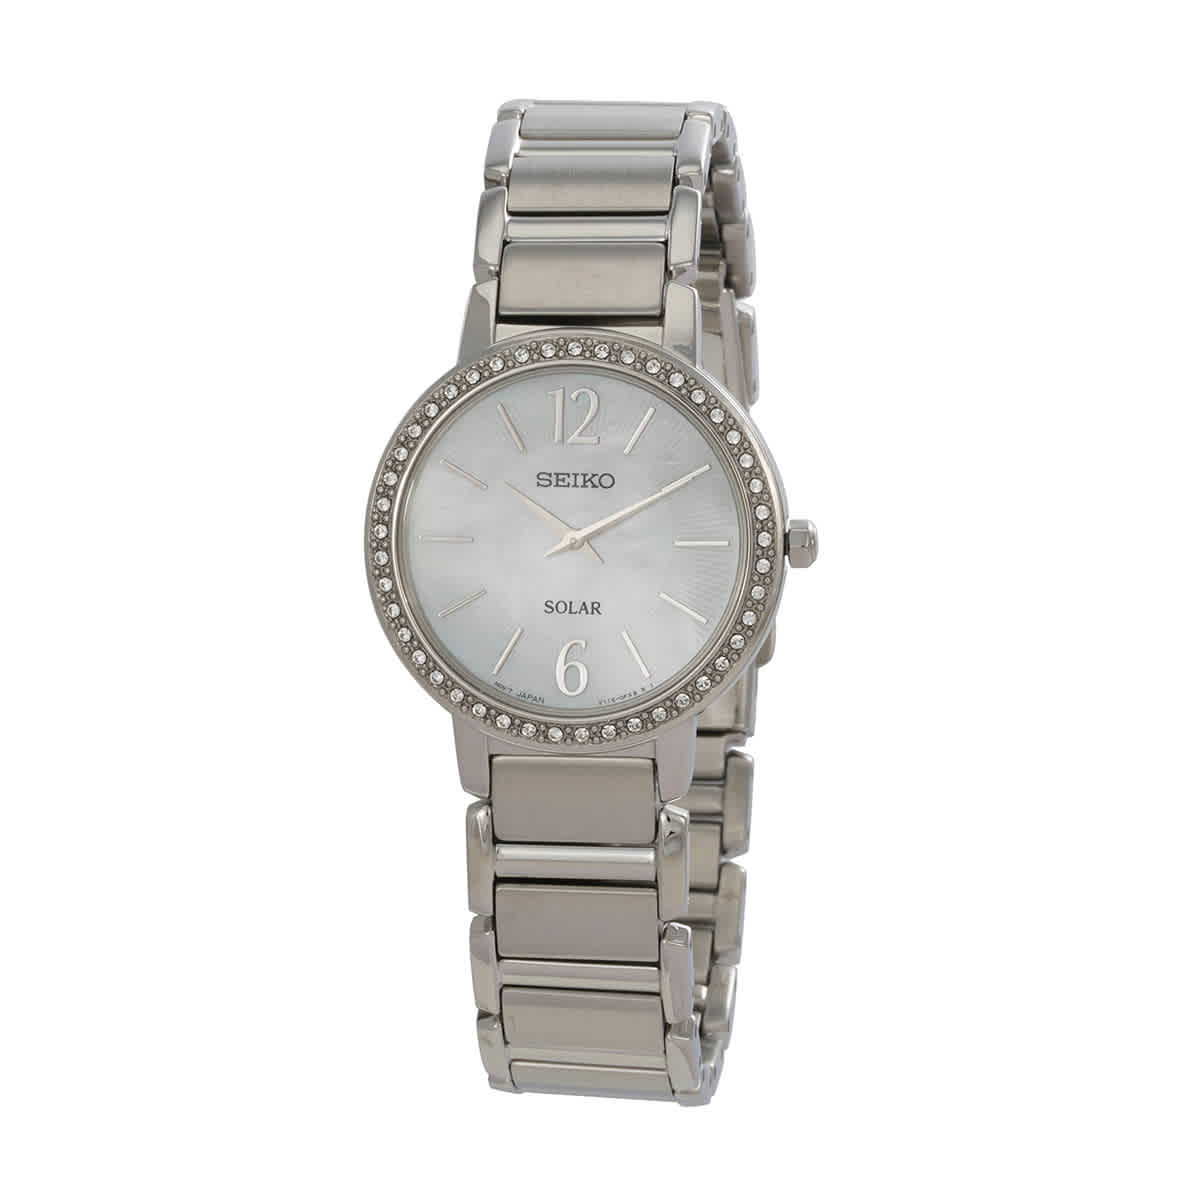 Seiko Solar Mother Of Pearl Dial Ladies Watch Sup467 In Mop / Mother Of Pearl